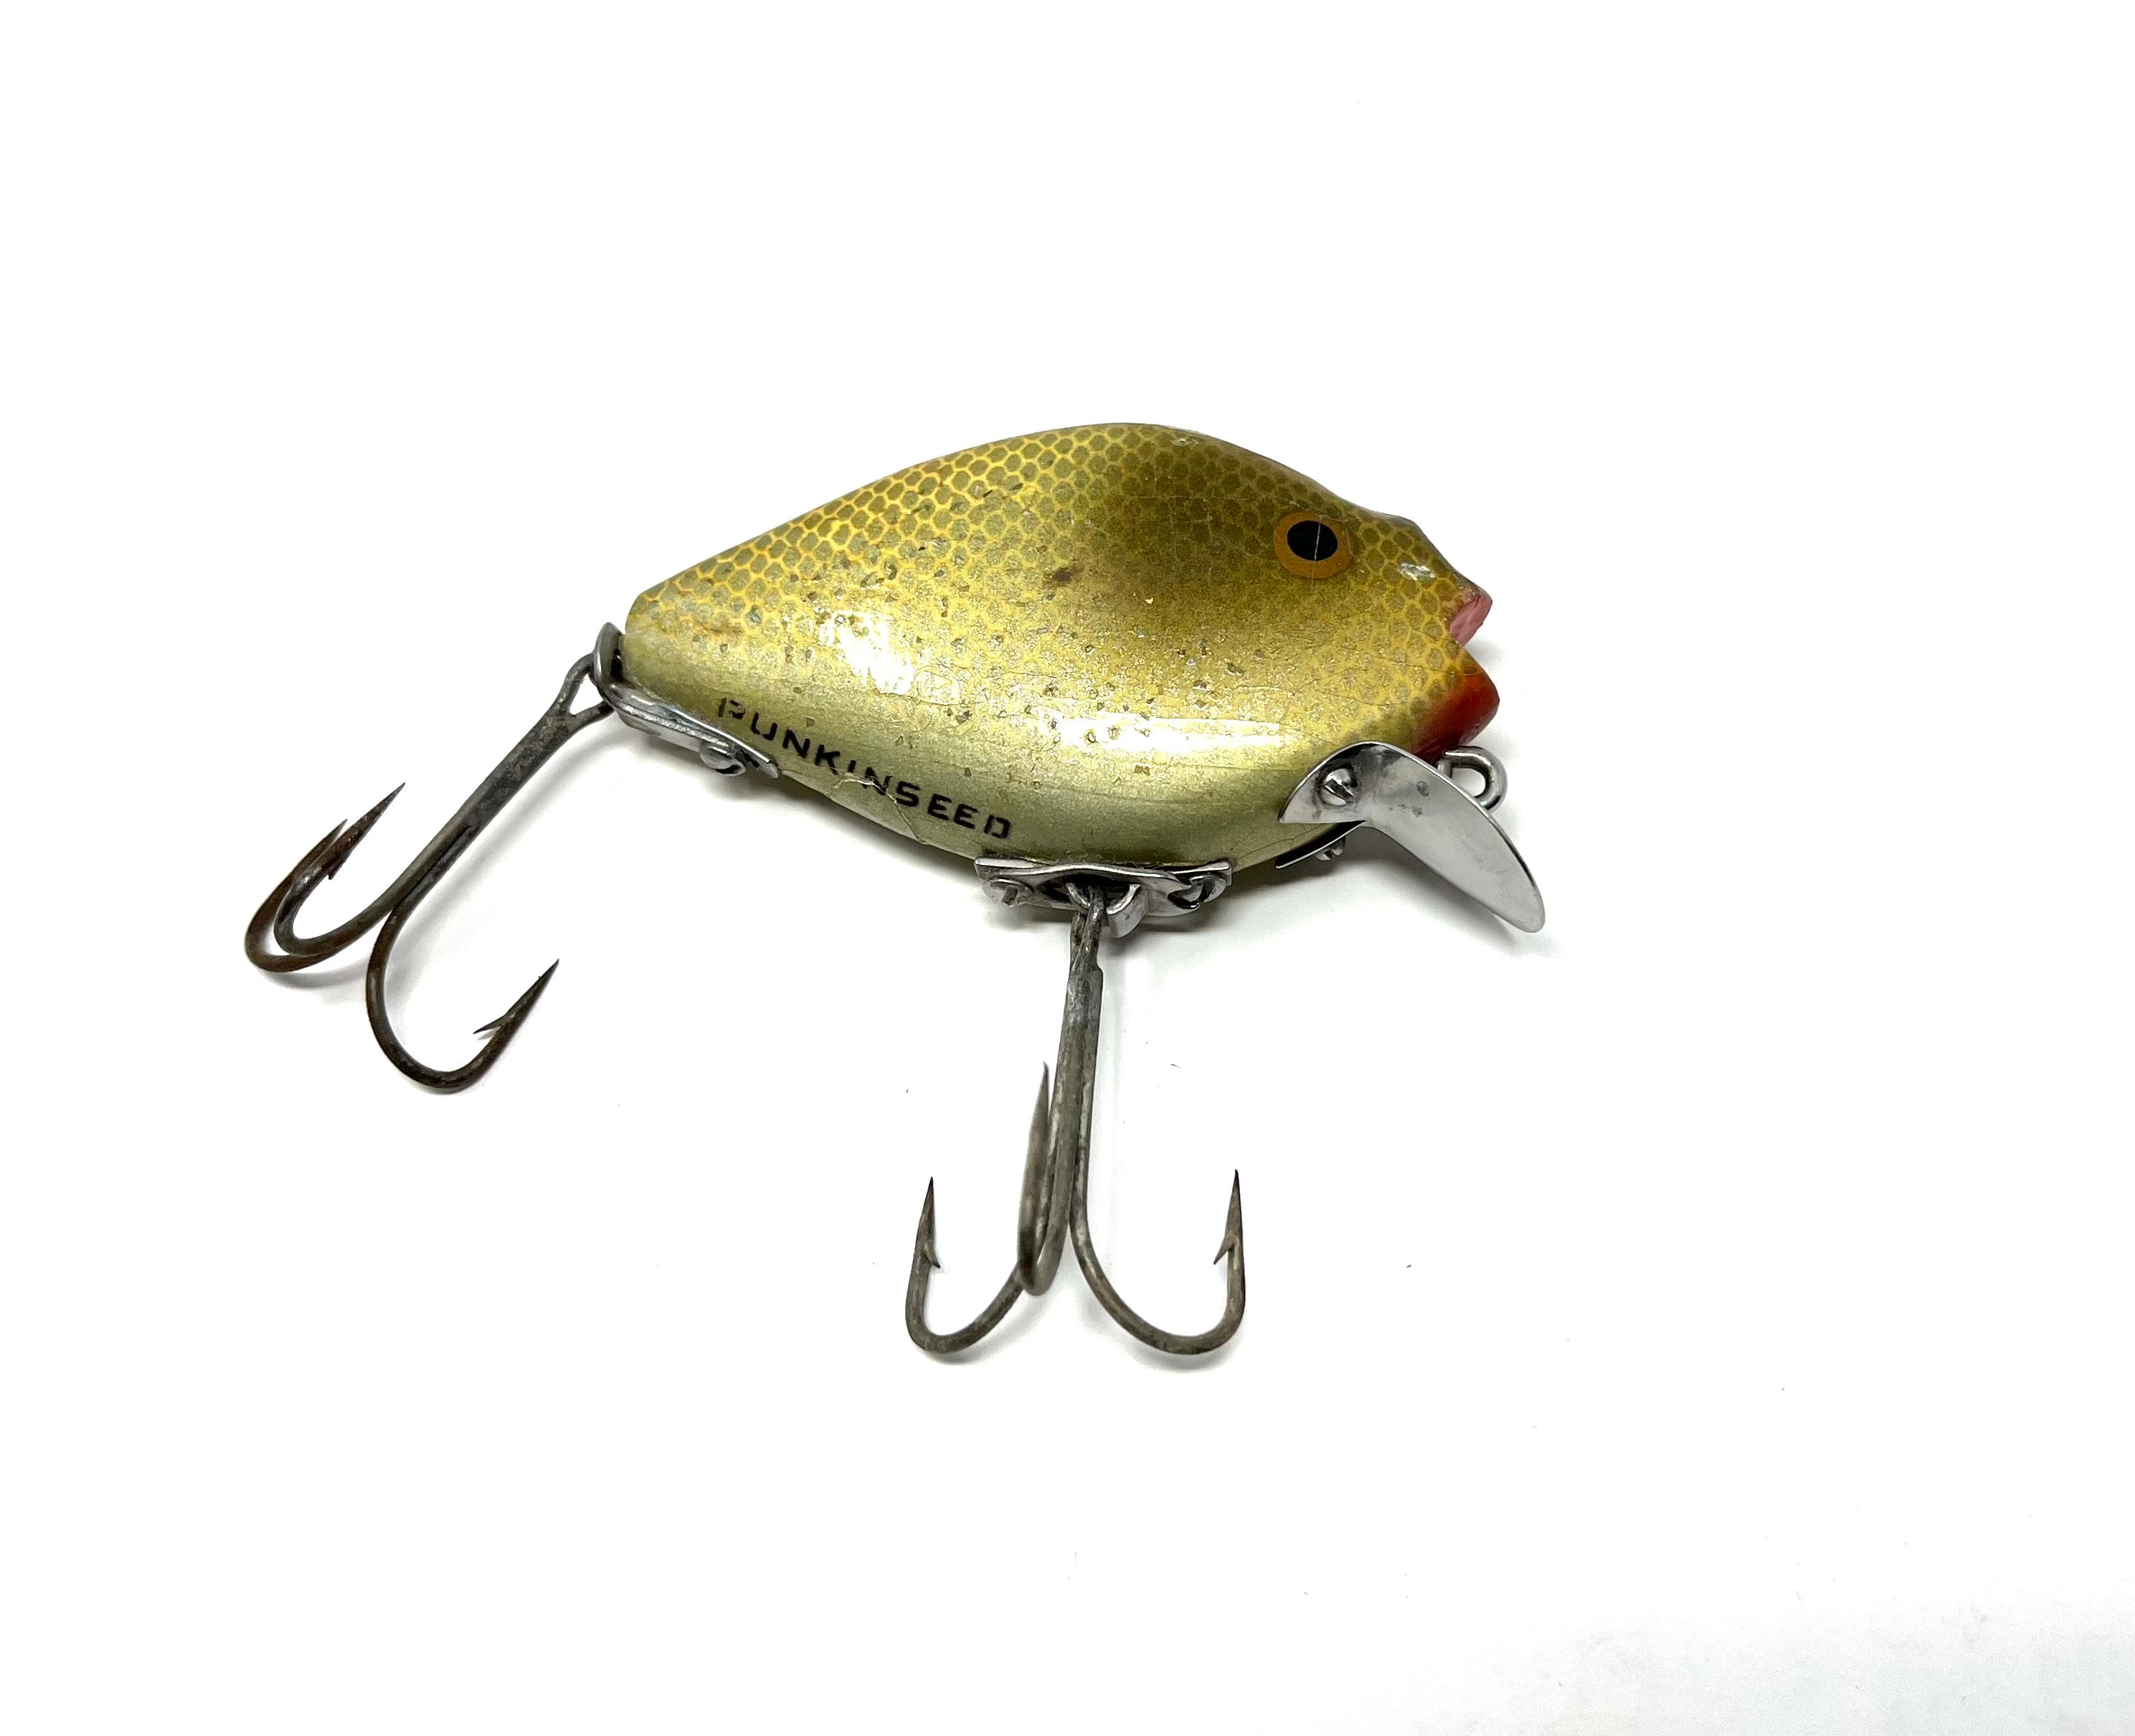 Vintage Heddon 740 Punkin Seed Lure in Shad / Antique Fishing Lure